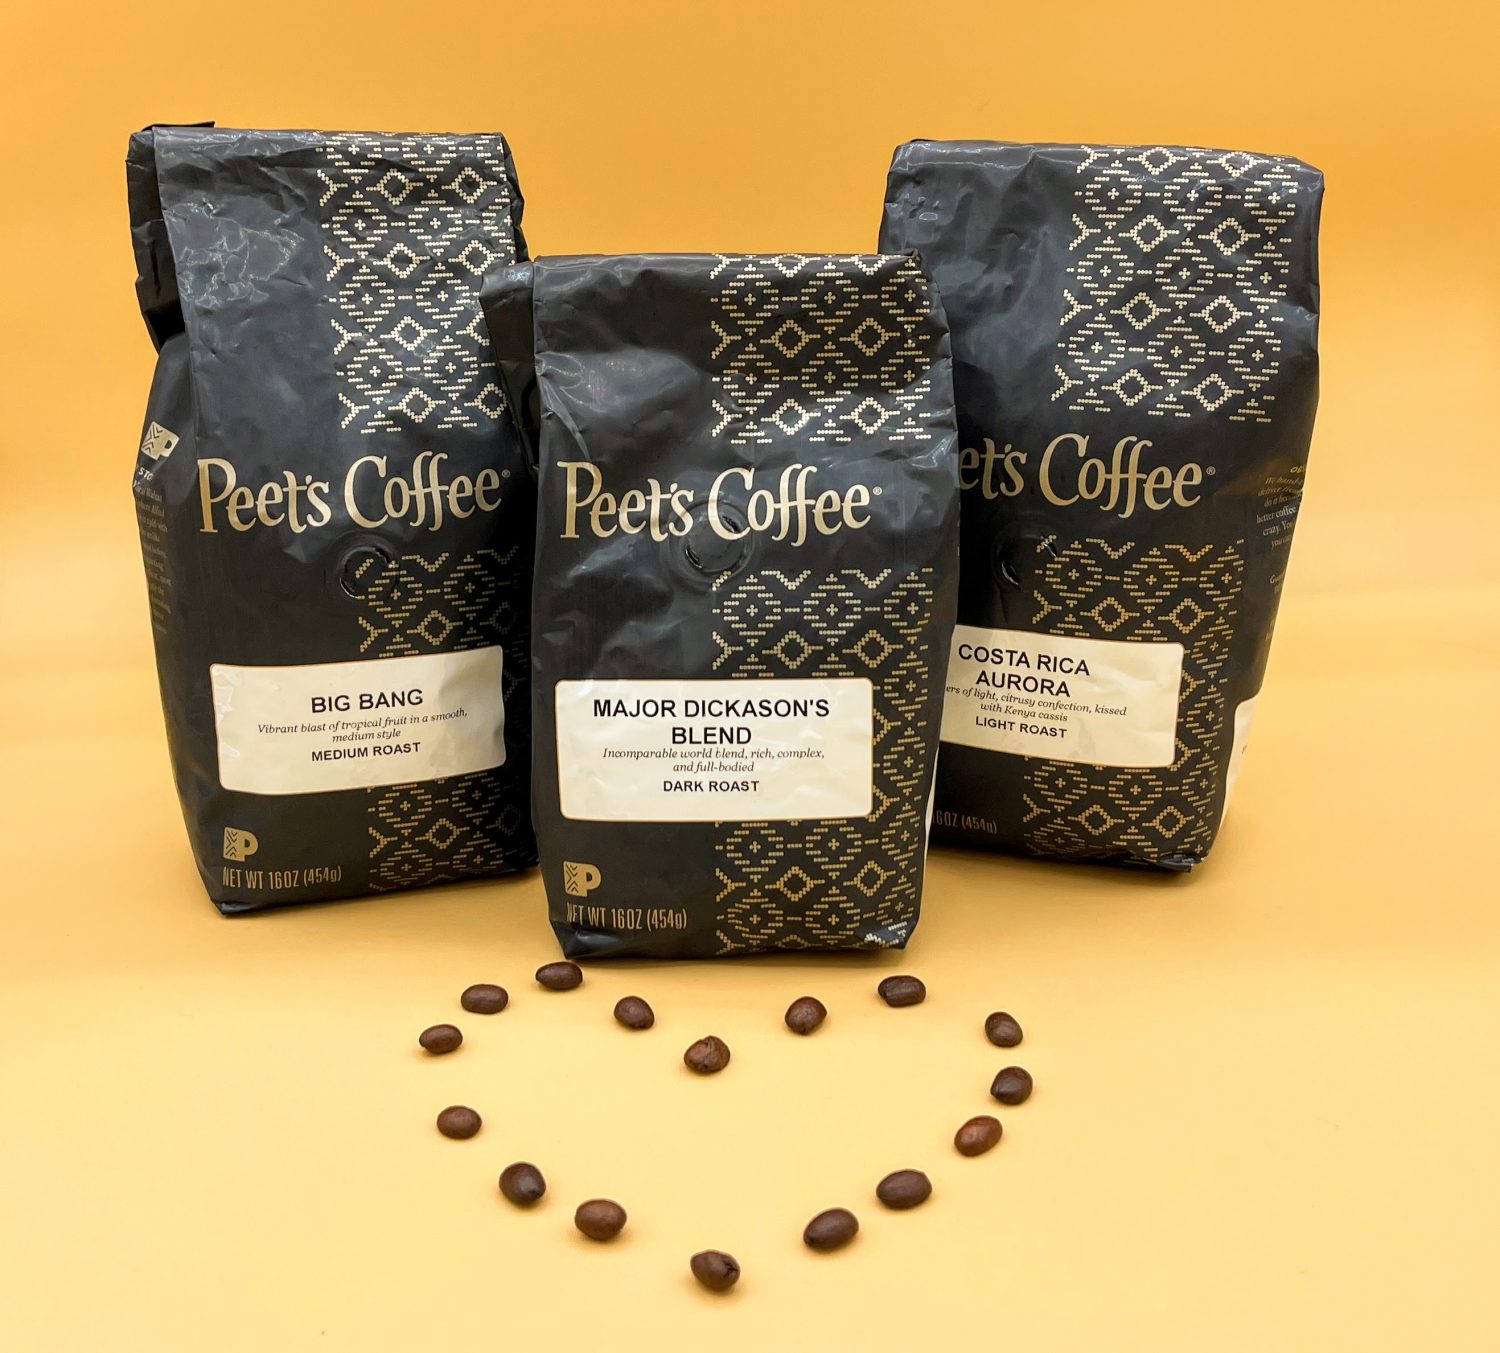 three-bags-of-petes-coffee-and-heart-made-from-coffee-beans